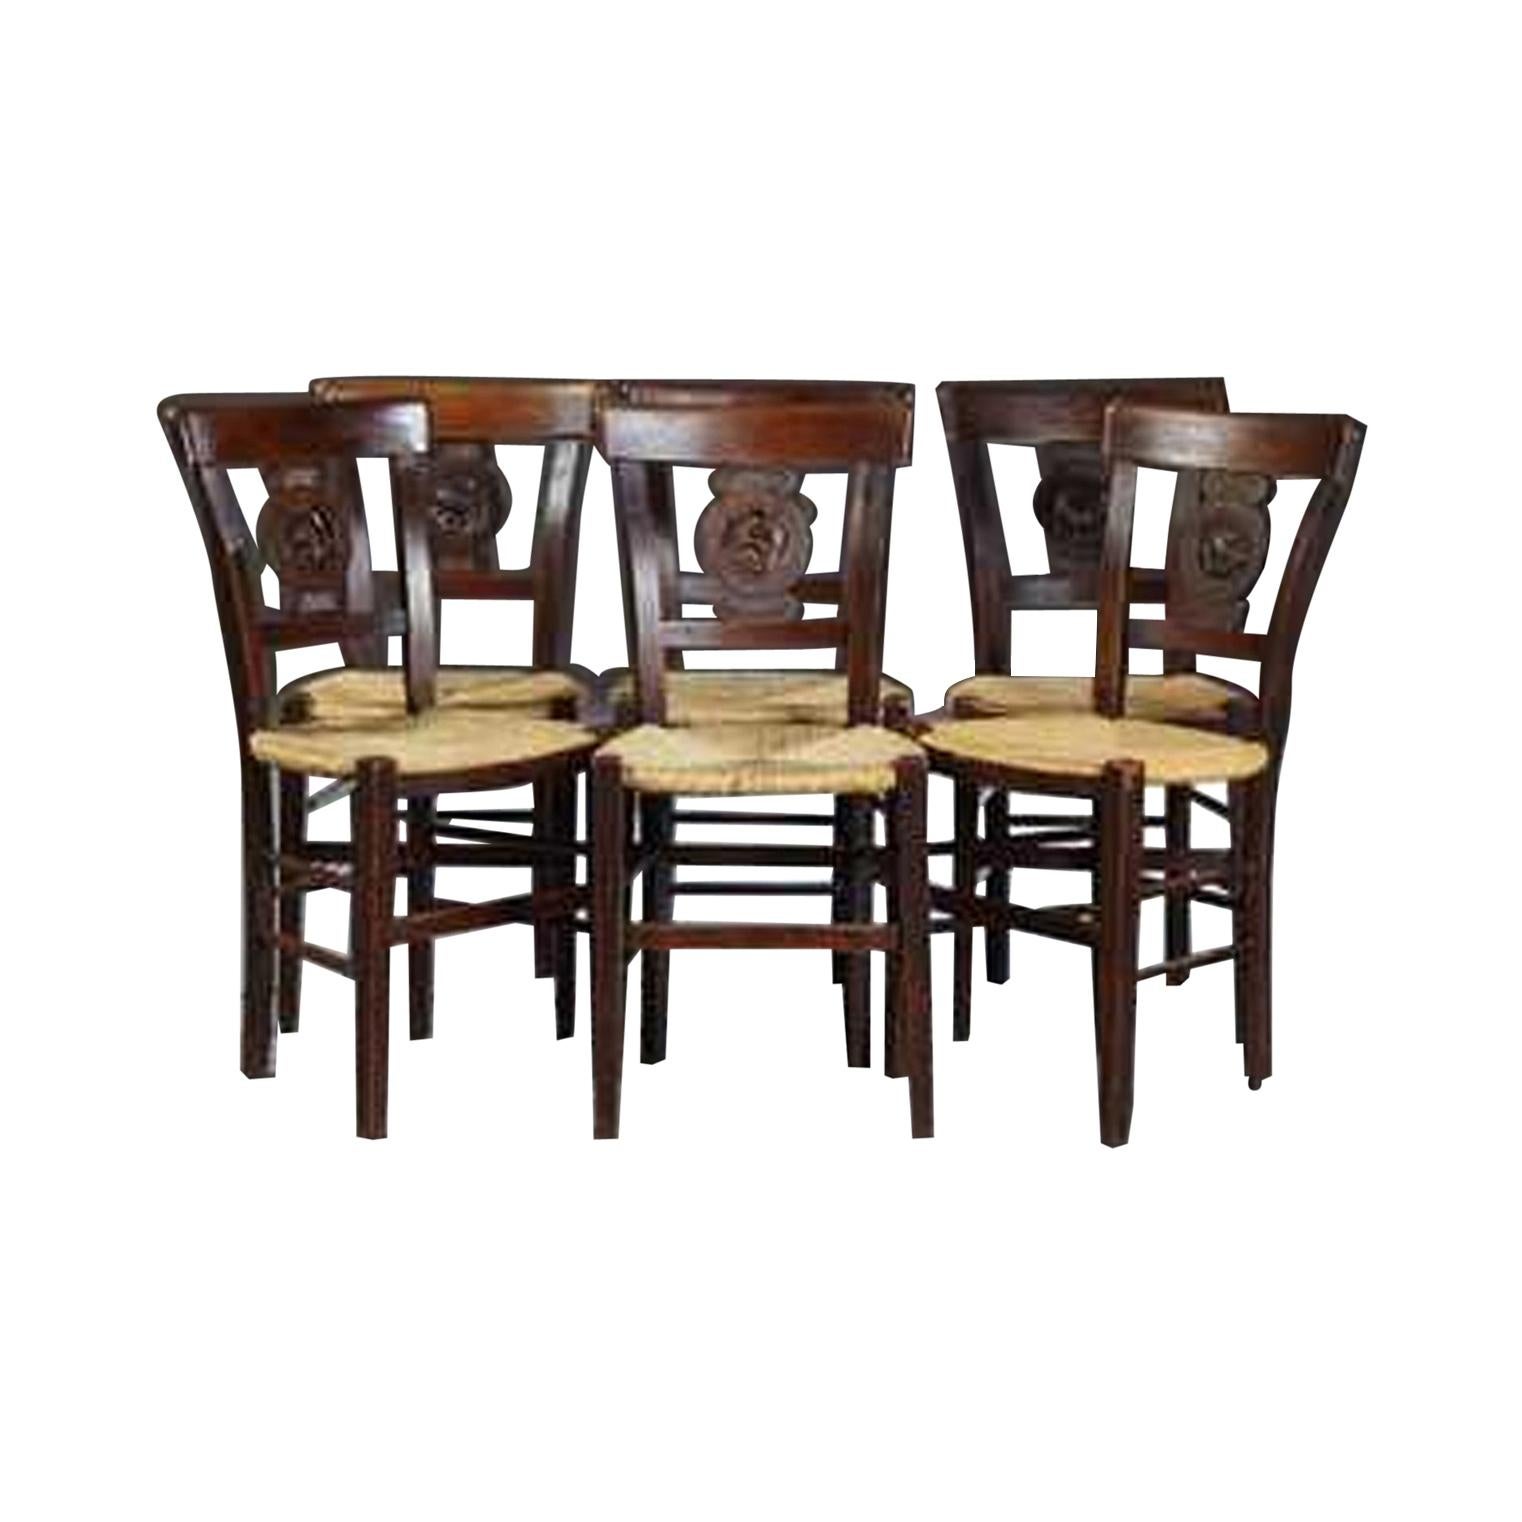 Six French Carved Walnut Rushseat Dining Chairs